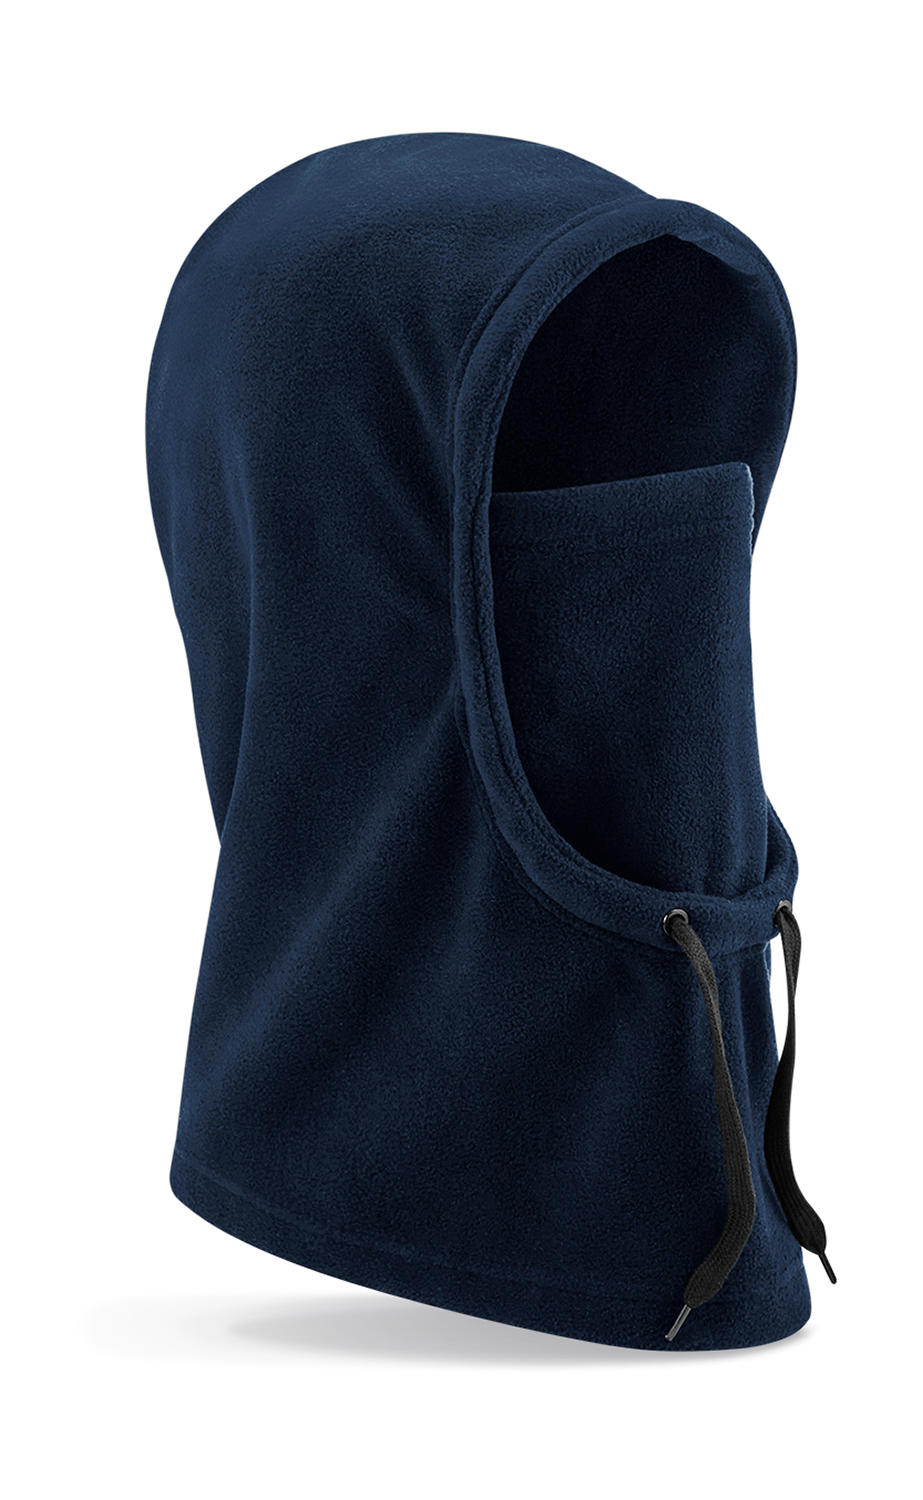  Recycled Fleece Hood in Farbe French Navy